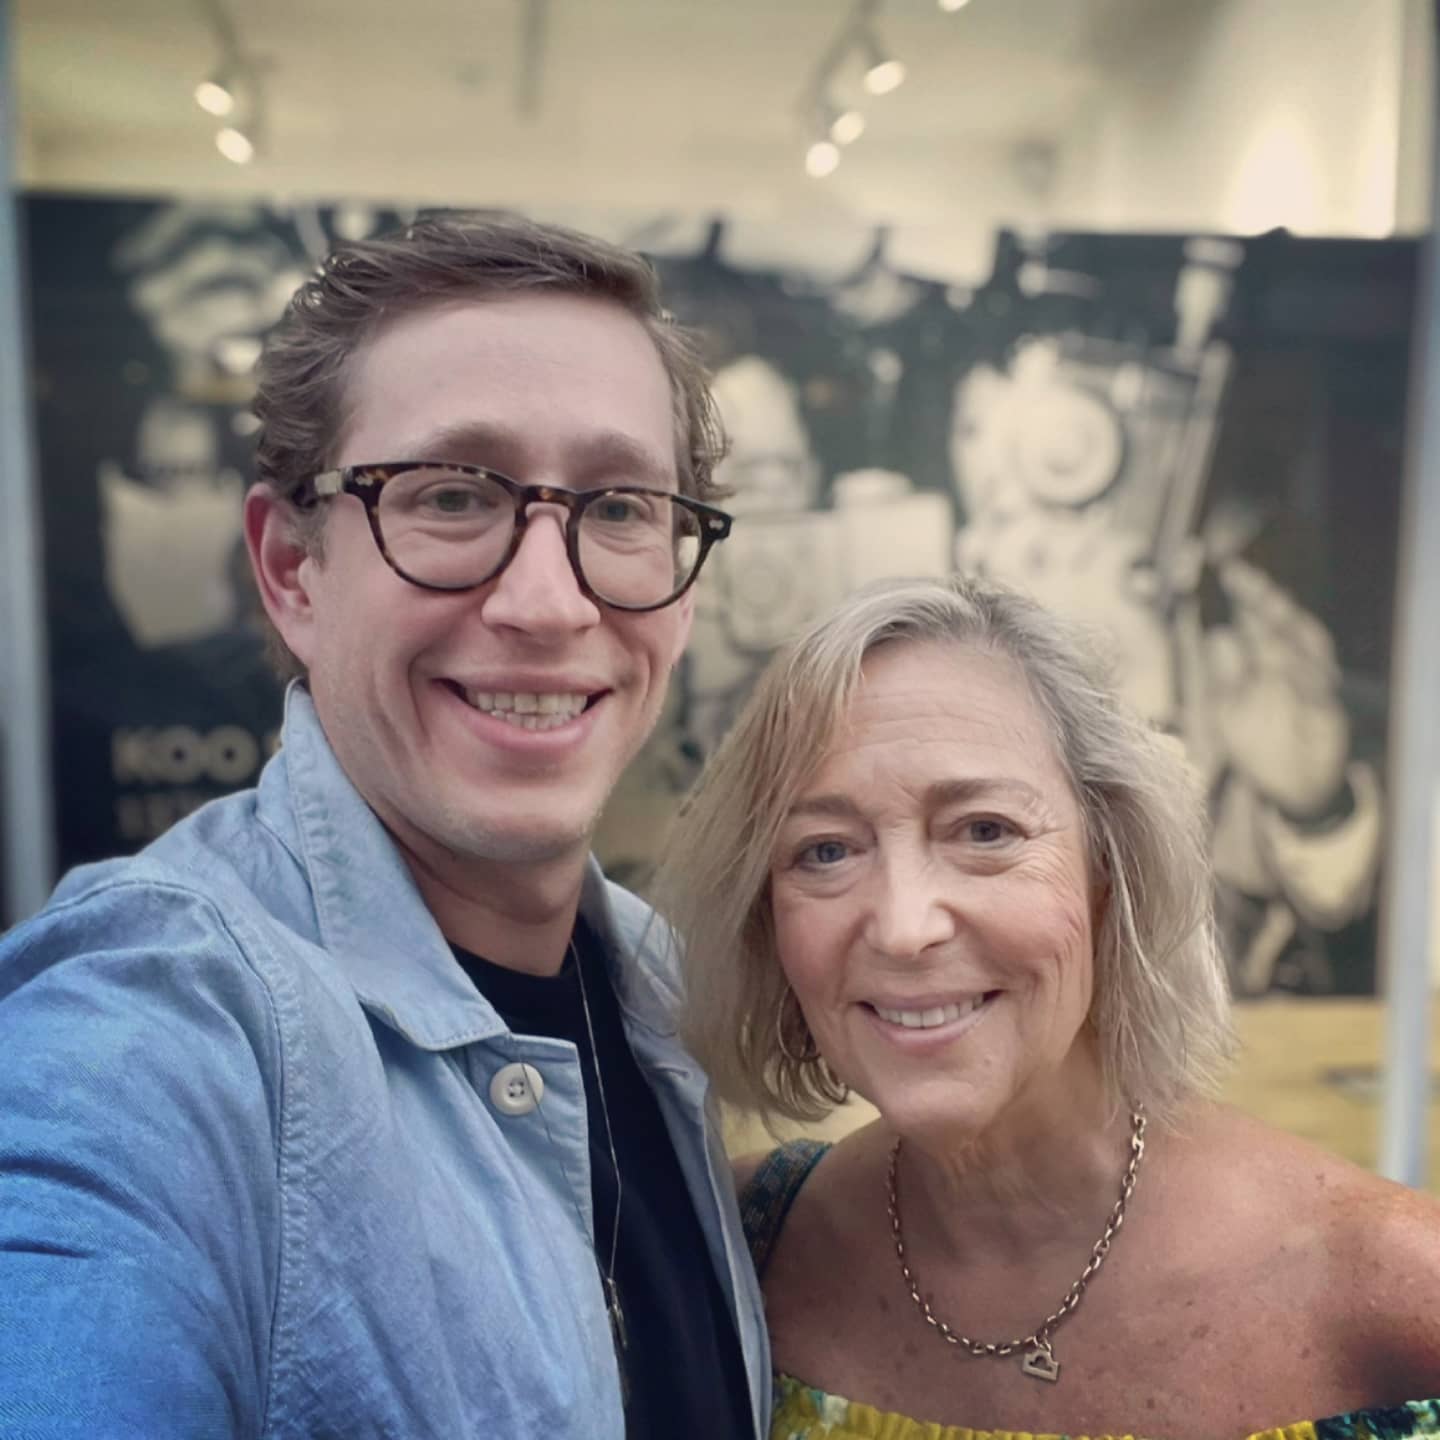 Night out with my son Rory @lord_snappington at the private view of Koo Stark's amazing black and white photography of celebrities @zarigallerylondon 
A must see. Would love to have bought one for my home - but run out of wall space.
.
Making the most of my last few weeks out and about - no crutches-  before my op.
.
.
.
@koo.stark